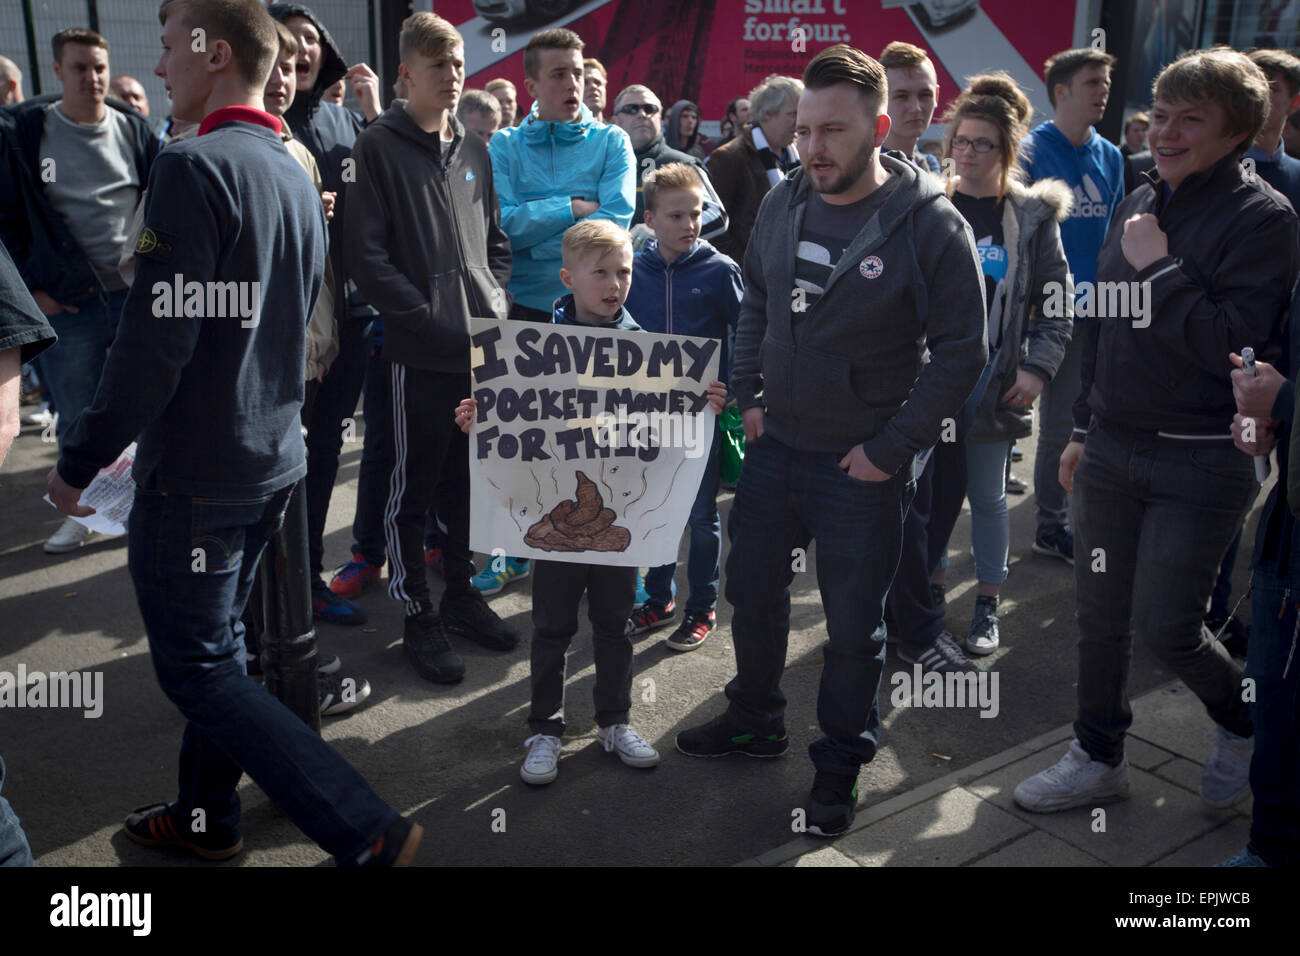 A young protester holding a sign during a demonstration at the Gallowgate end of the stadium before Newcastle United host Tottenham Hotspurs in an English Premier League match at St. James' Park. The match was boycotted by a section of the home support critical of the role of owner Mike Ashley and sponsorship by a payday loan company. The match was won by Spurs by 3-1, watched by 47,427, the lowest league gate of the season at the stadium. Stock Photo